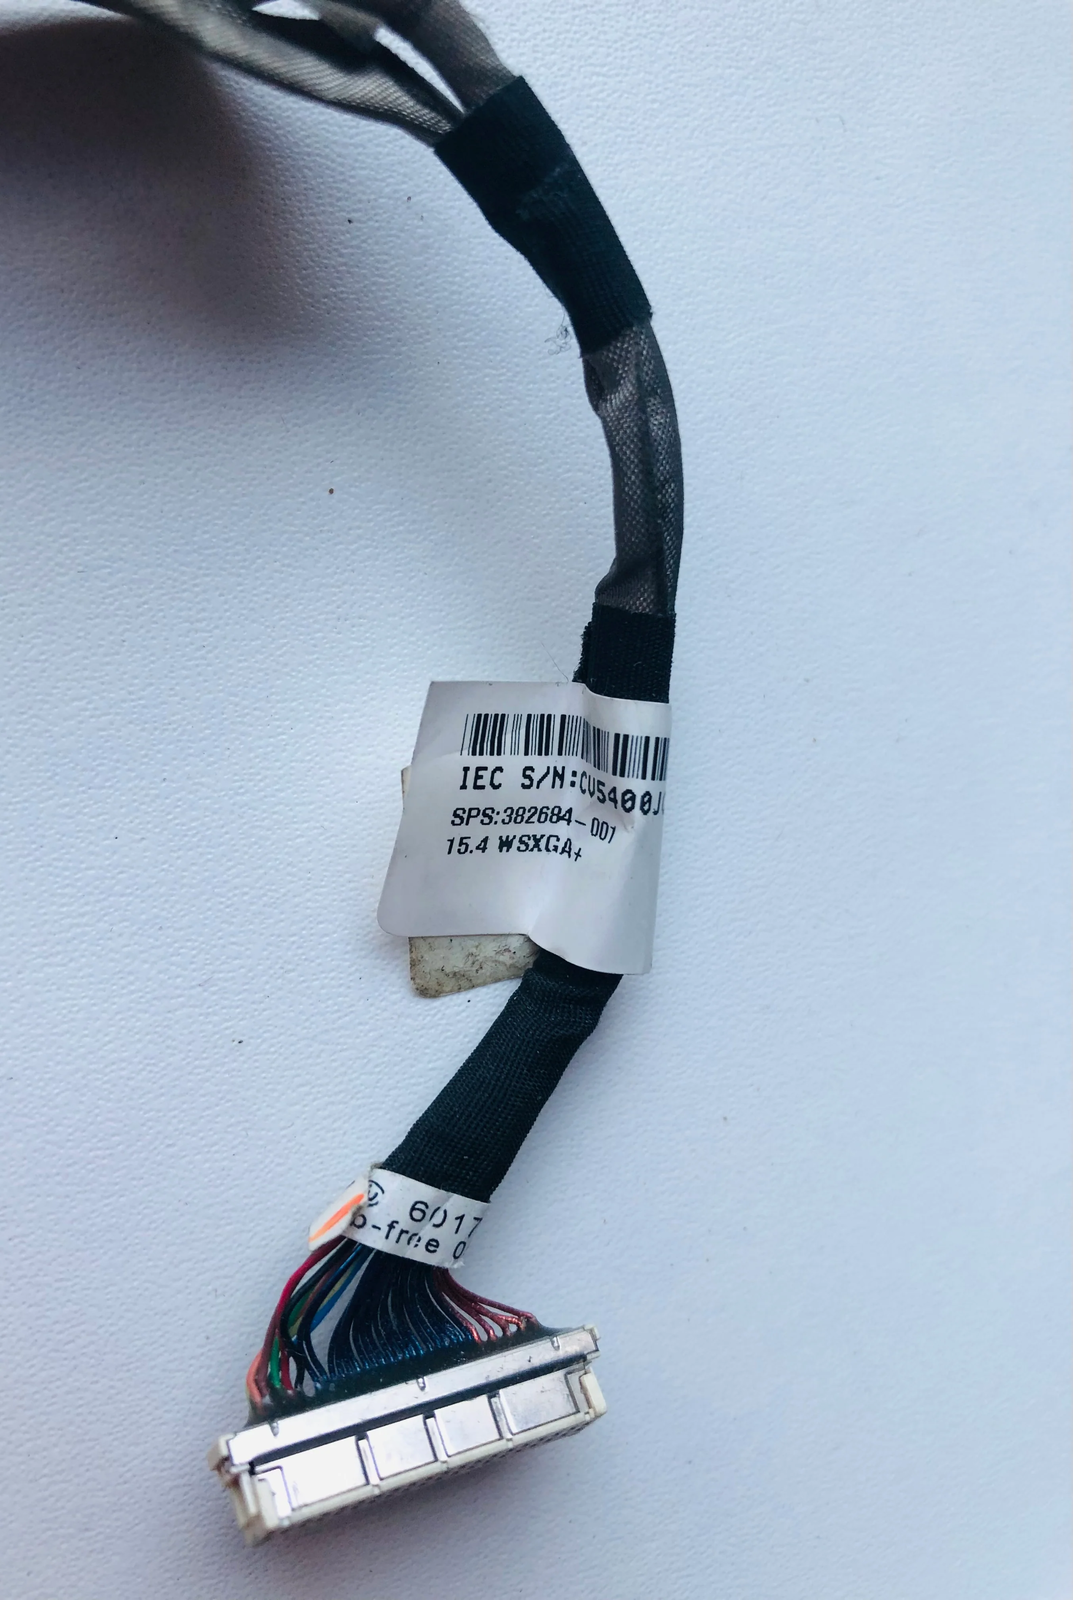 382684-001 HP Compaq NX8220 LCD Cable